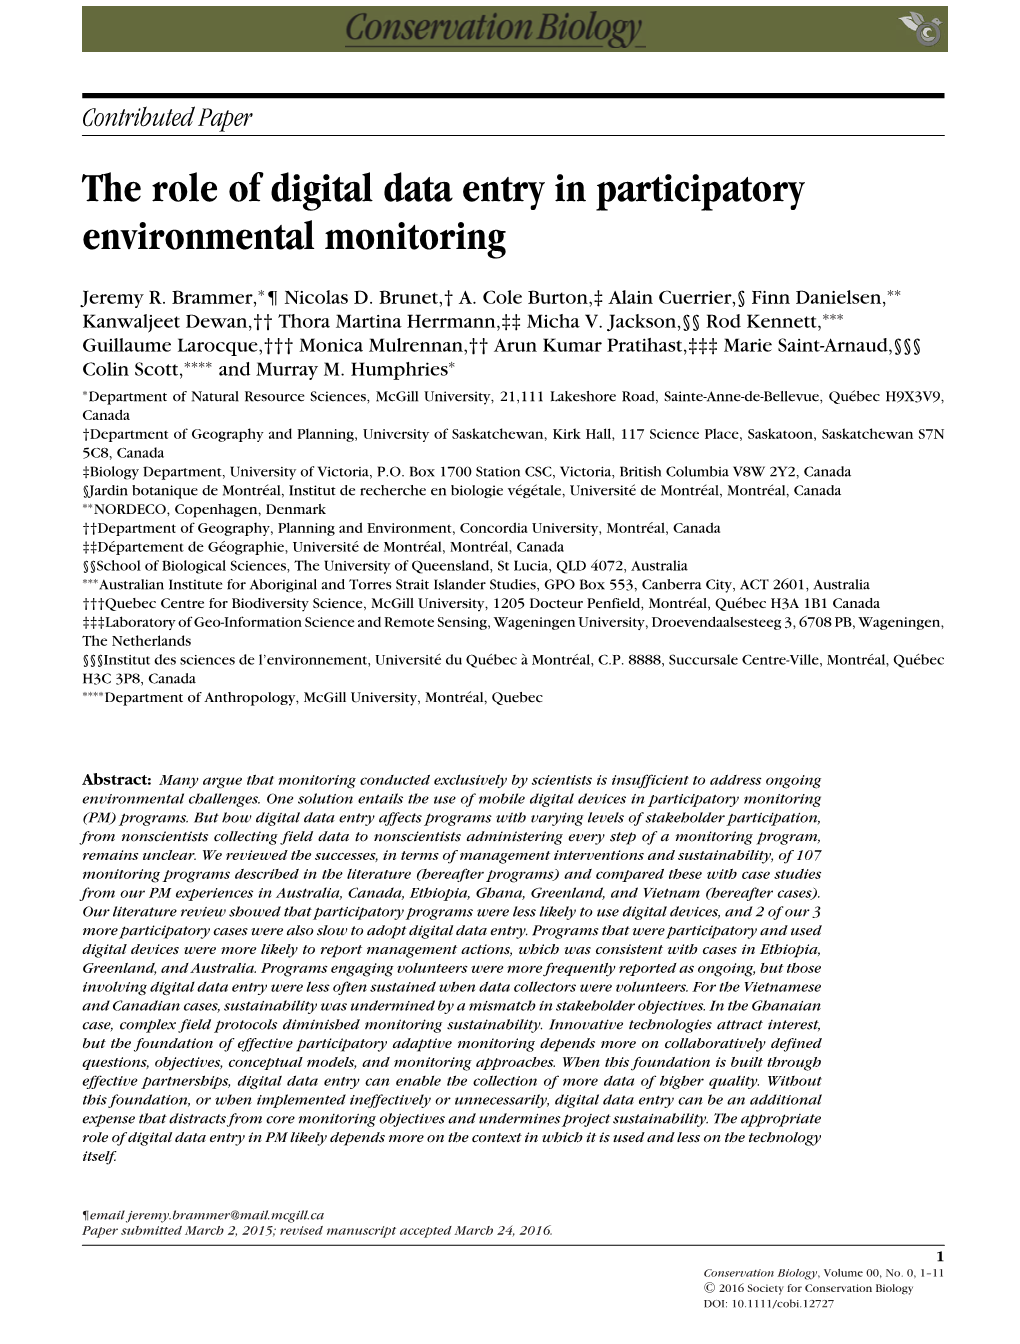 The Role of Digital Data Entry in Participatory Environmental Monitoring